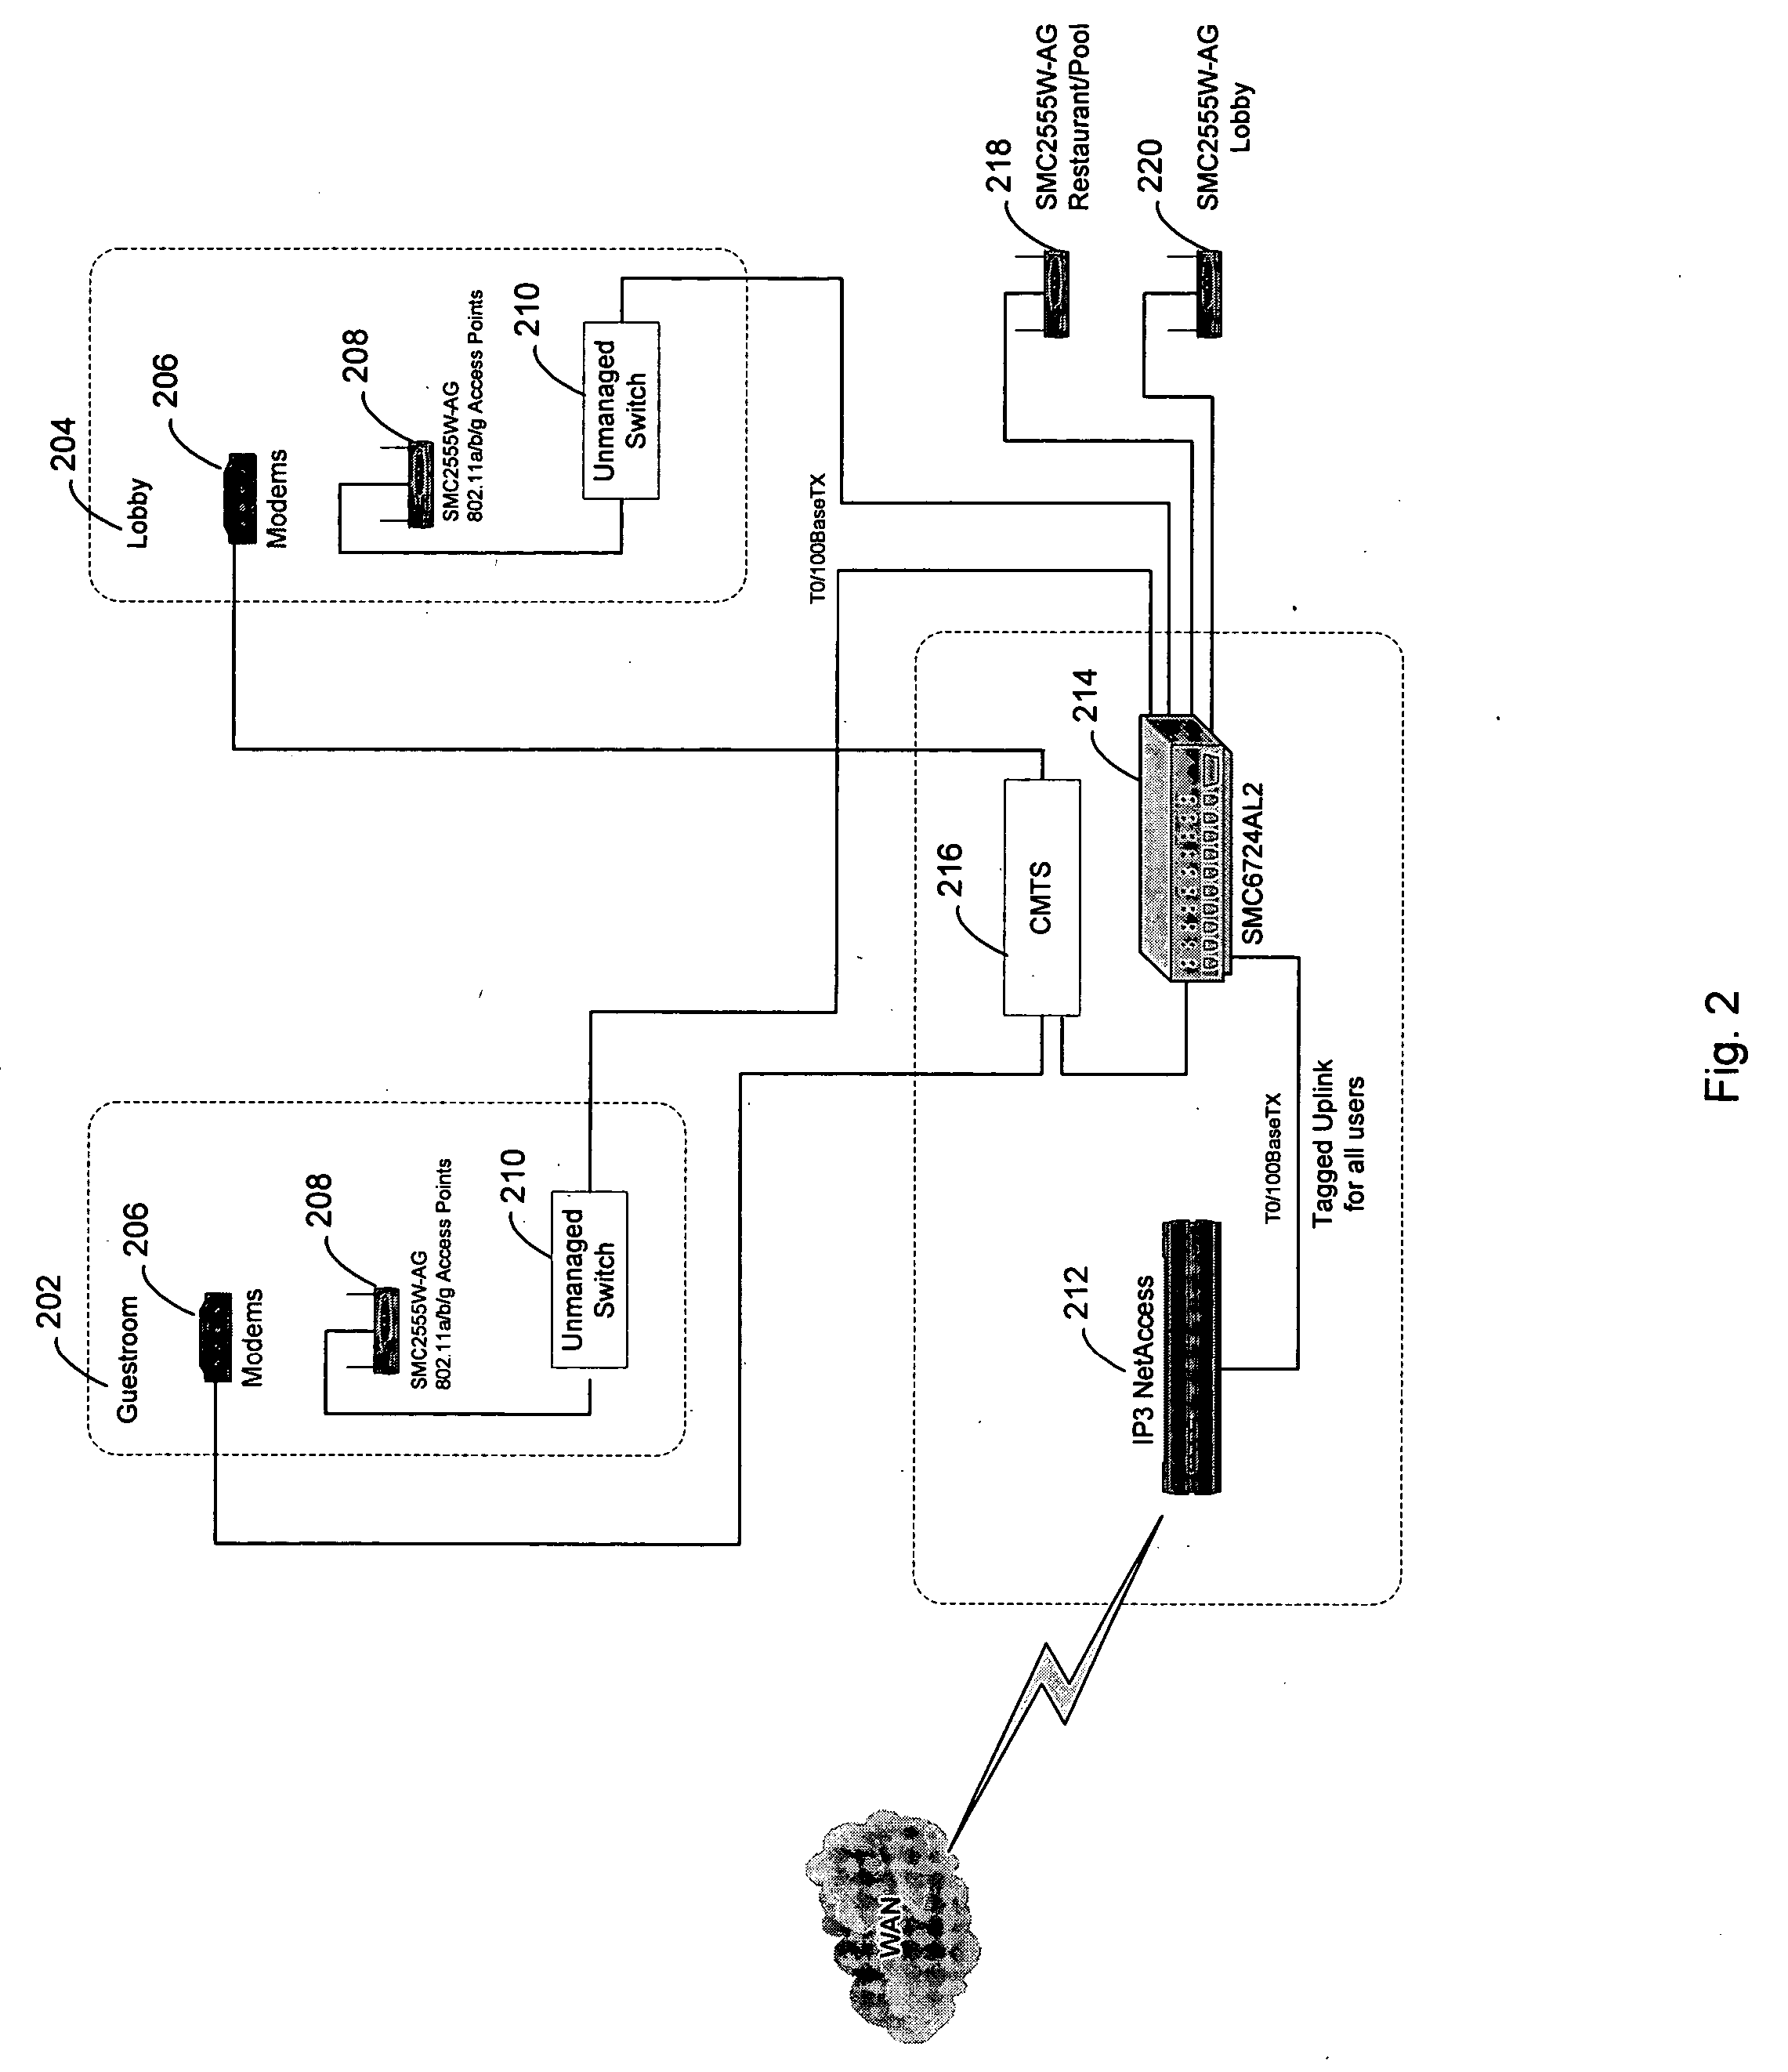 Systems and methods for multi-level gateway provisioning based on a device's location